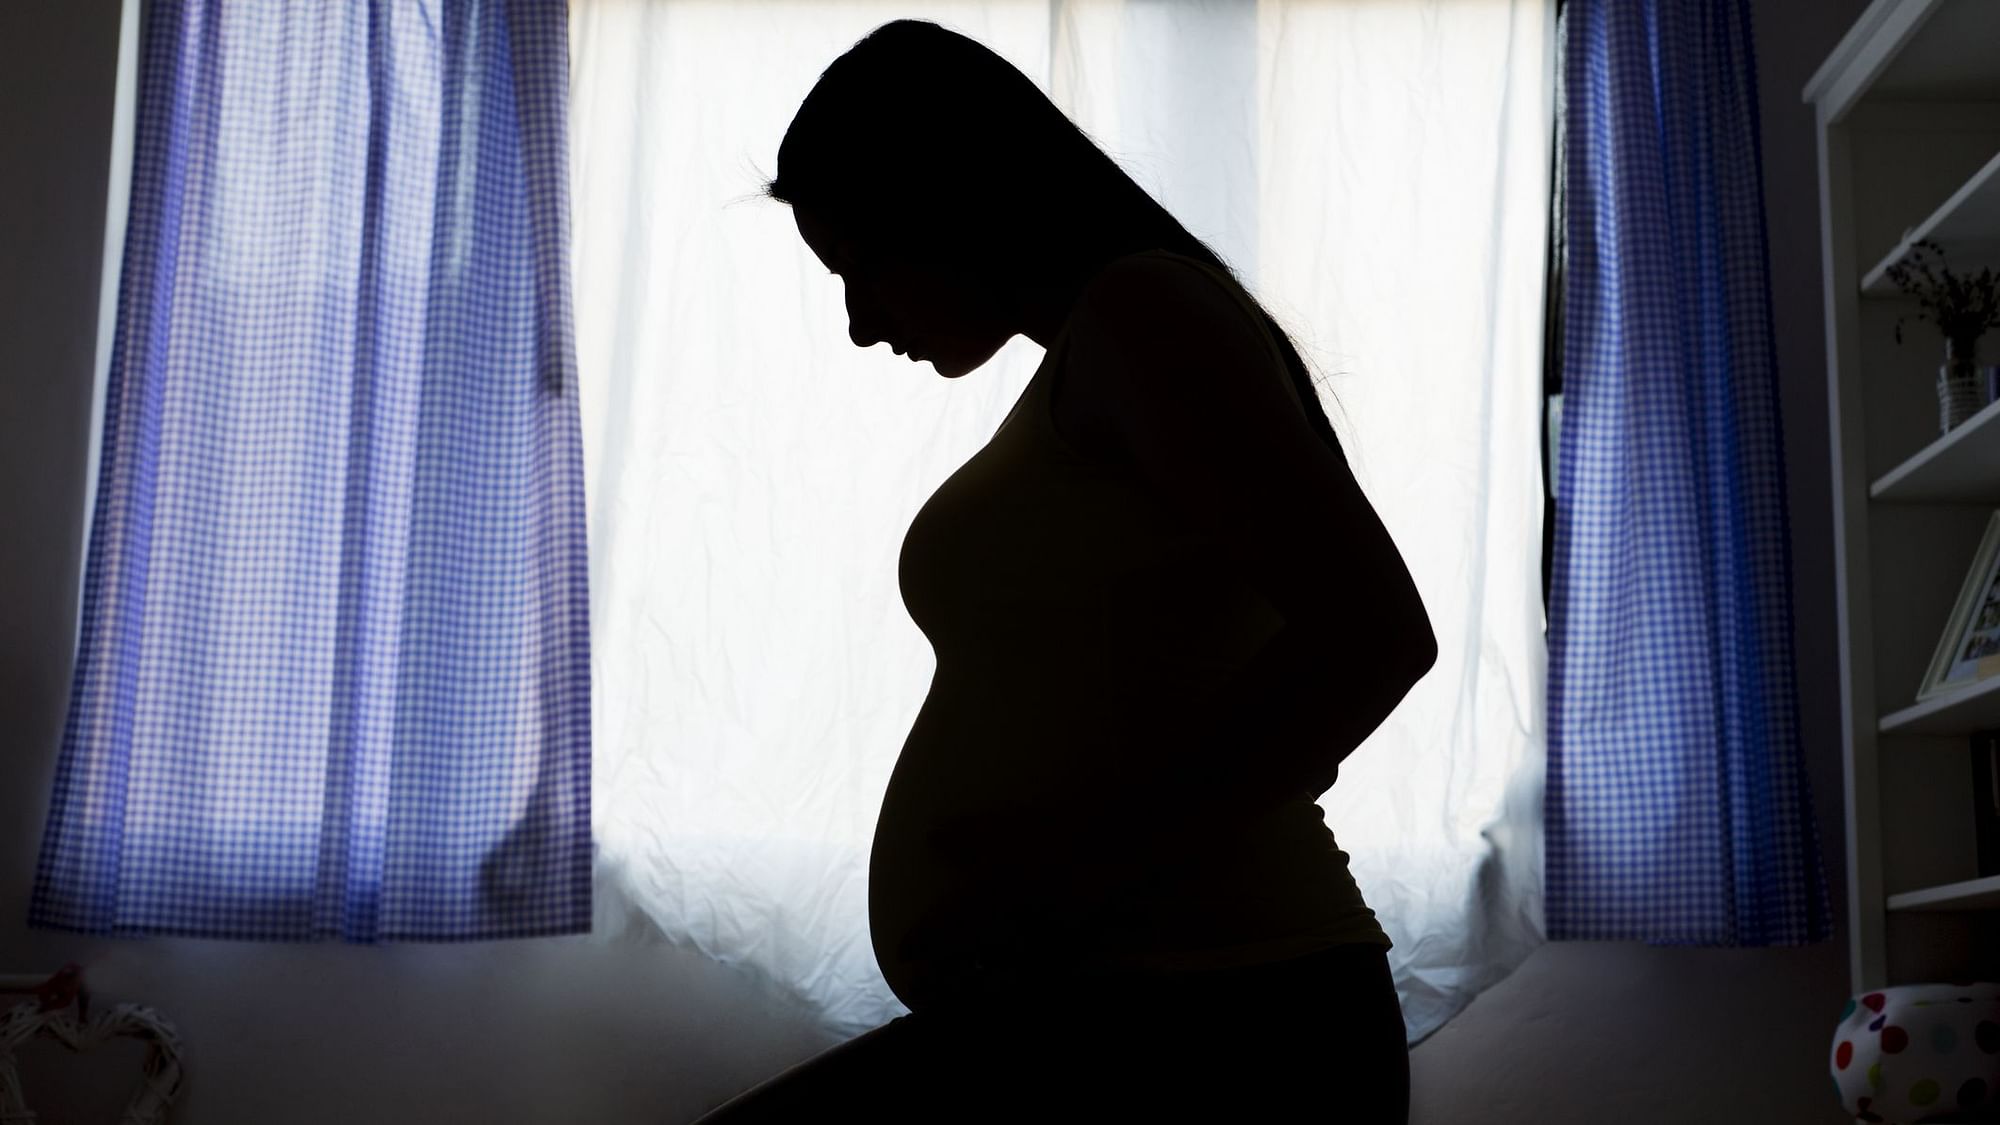 The petition was filed by a Pune woman, who was seeking permission to terminate her 24-week pregnancy.